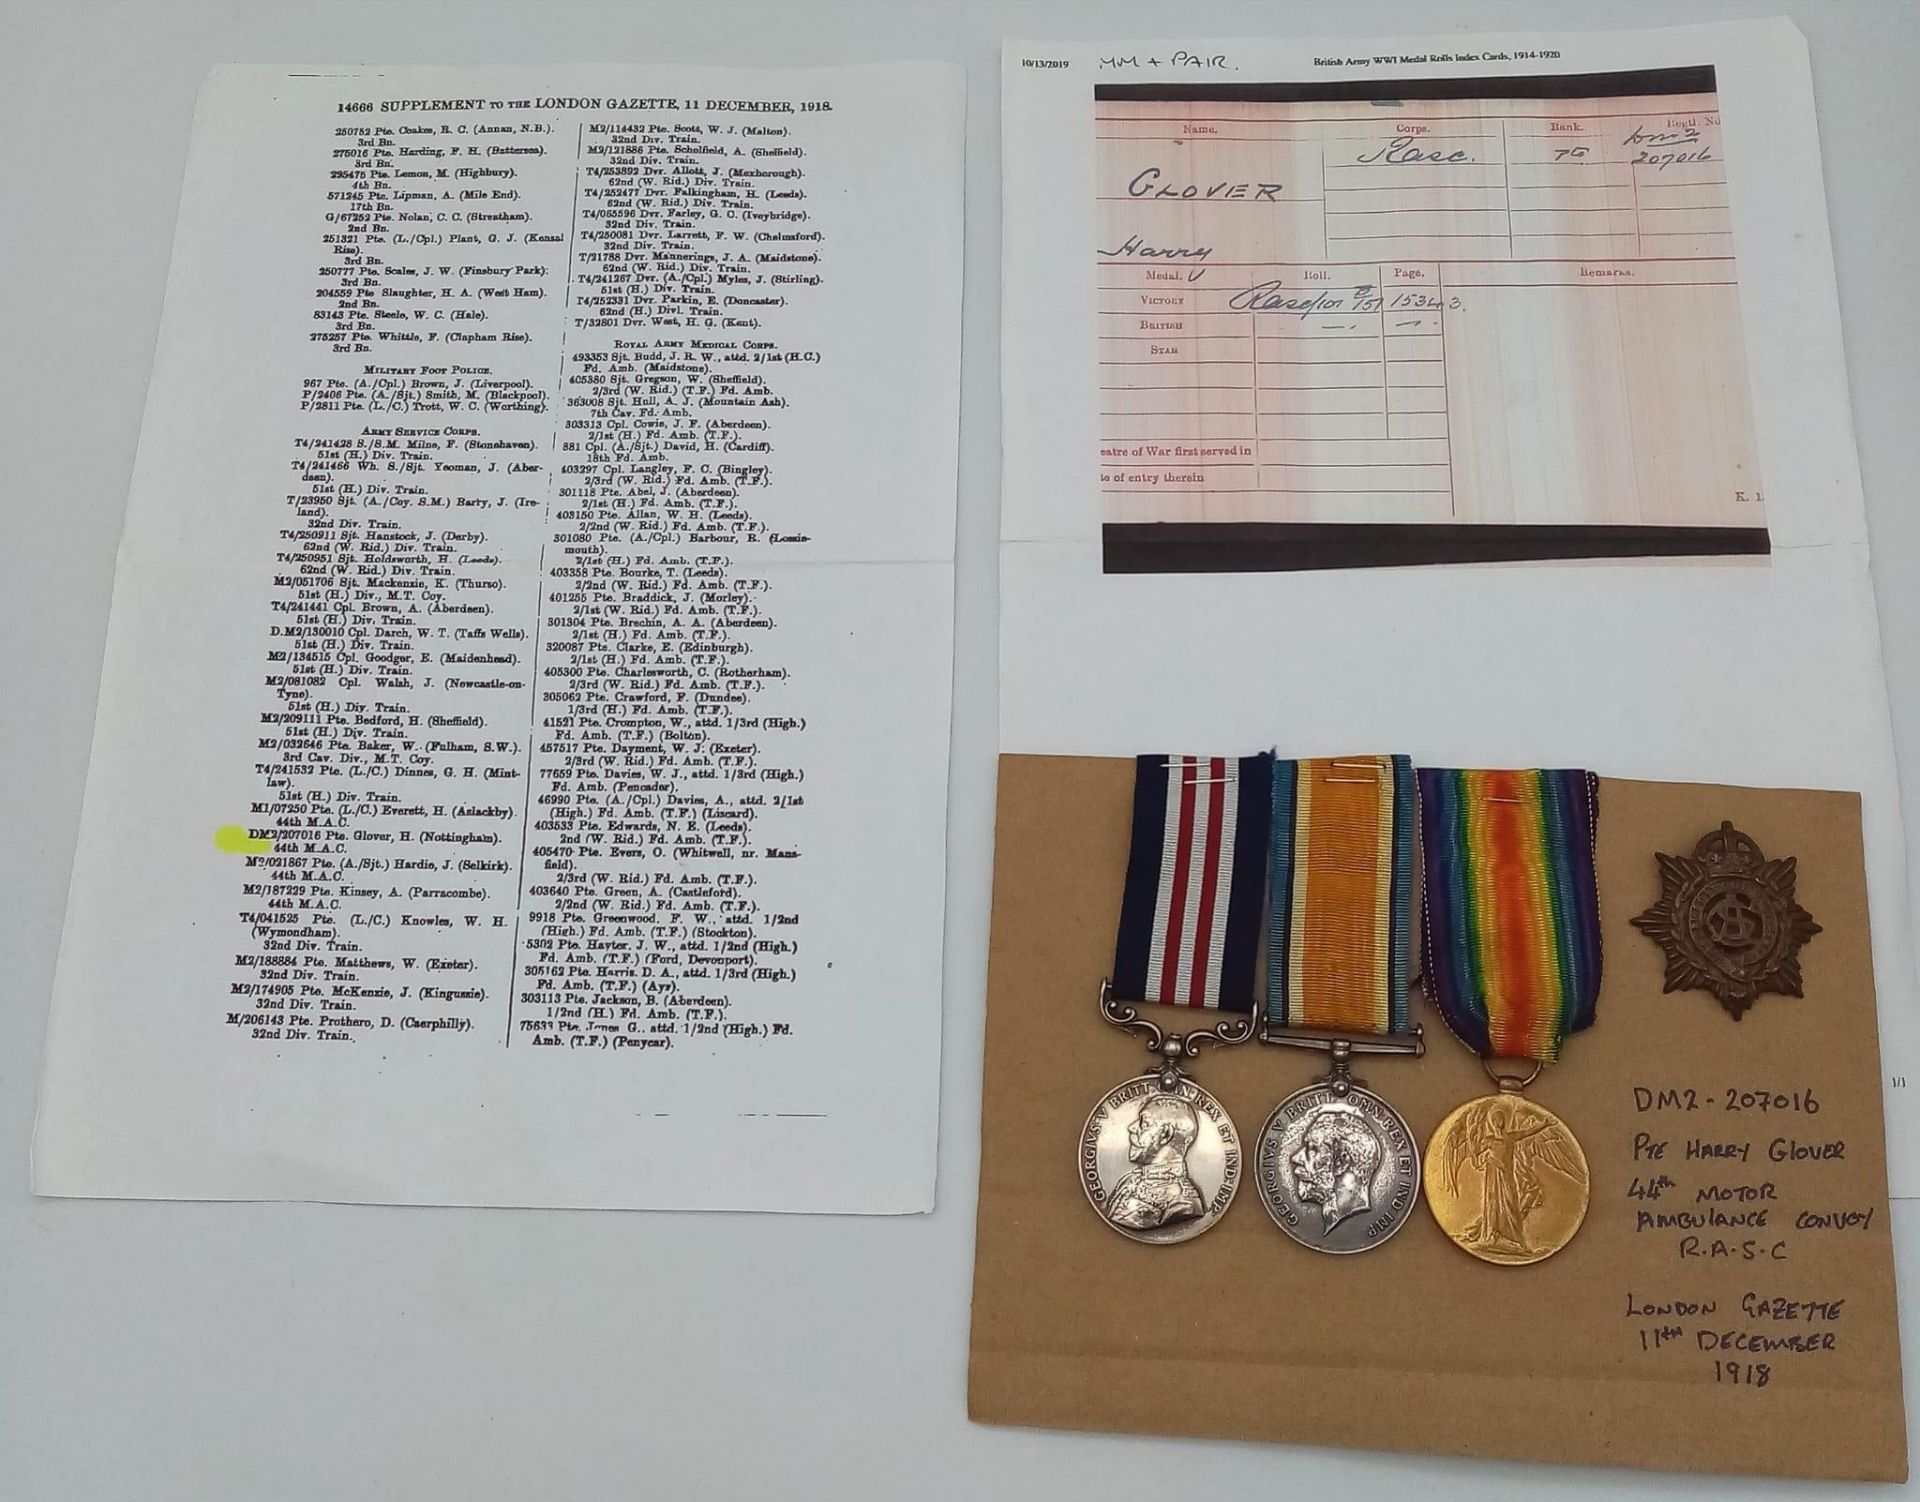 A WW1 Military Medal Group Awarded to DM2.207016 Pte Harry Glover 44 th Motor Ambulance Convoy - Bild 6 aus 6